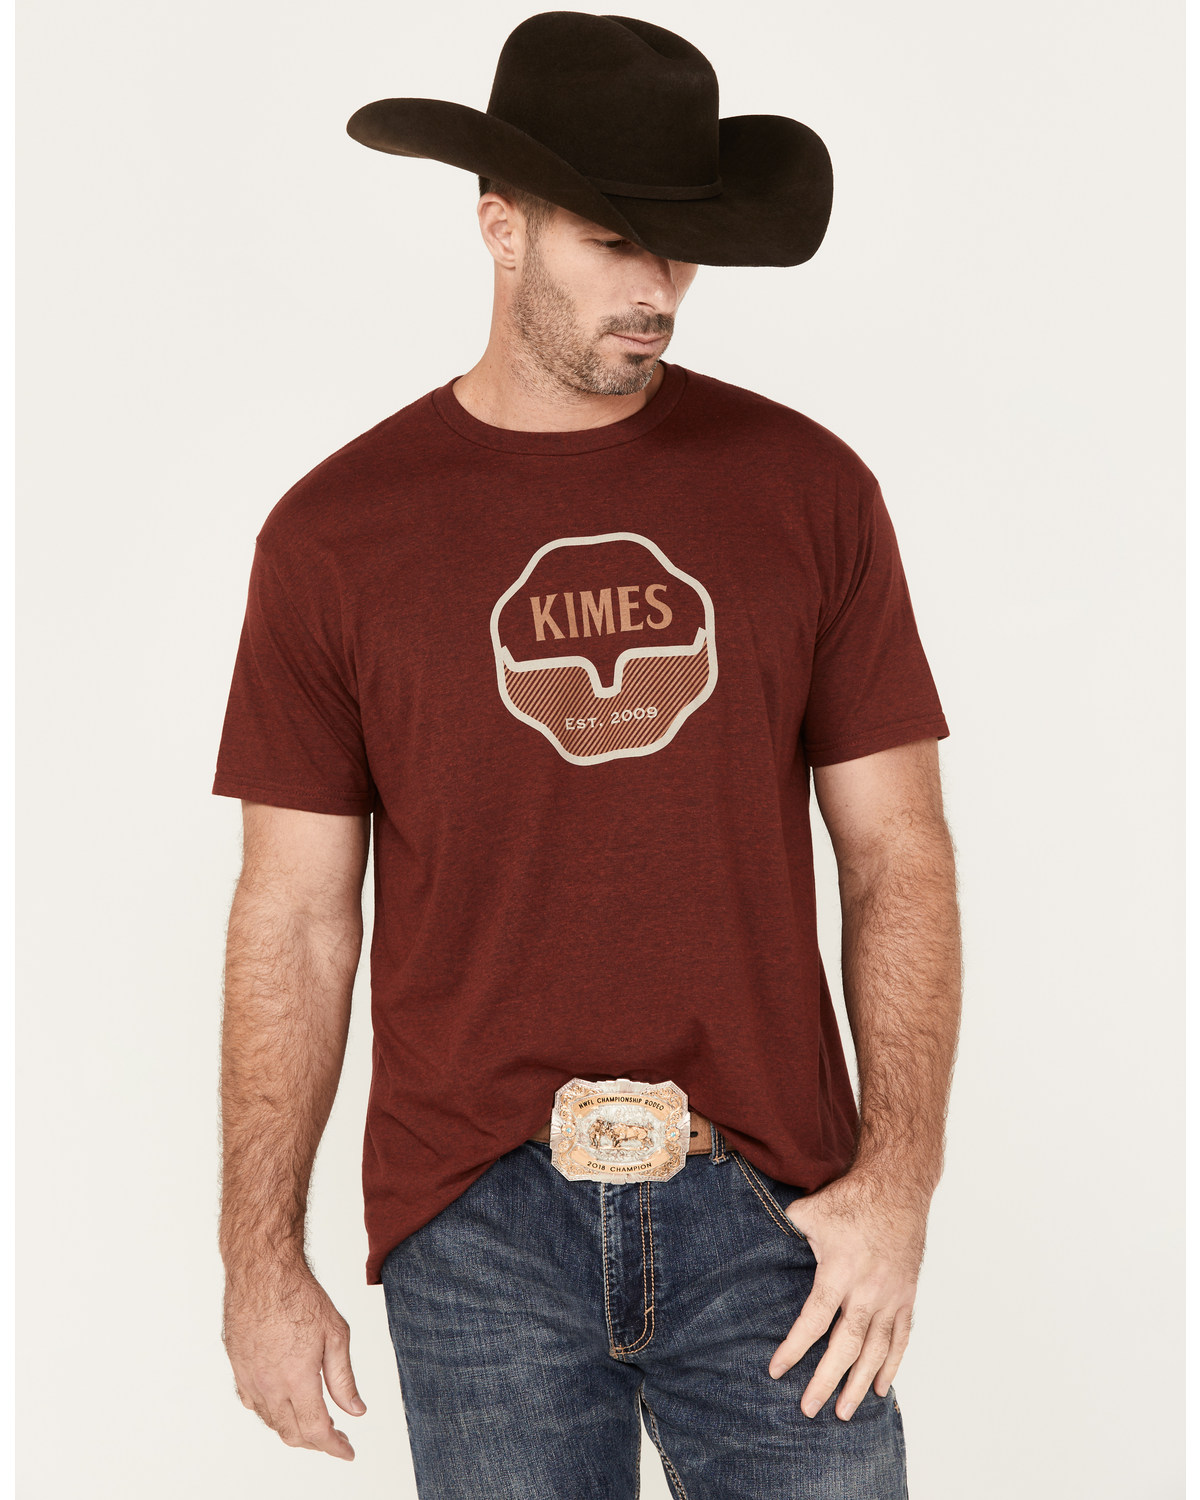 Kimes Ranch Men's Boot Barn Exclusive Notary Short Sleeve Graphic T-Shirt